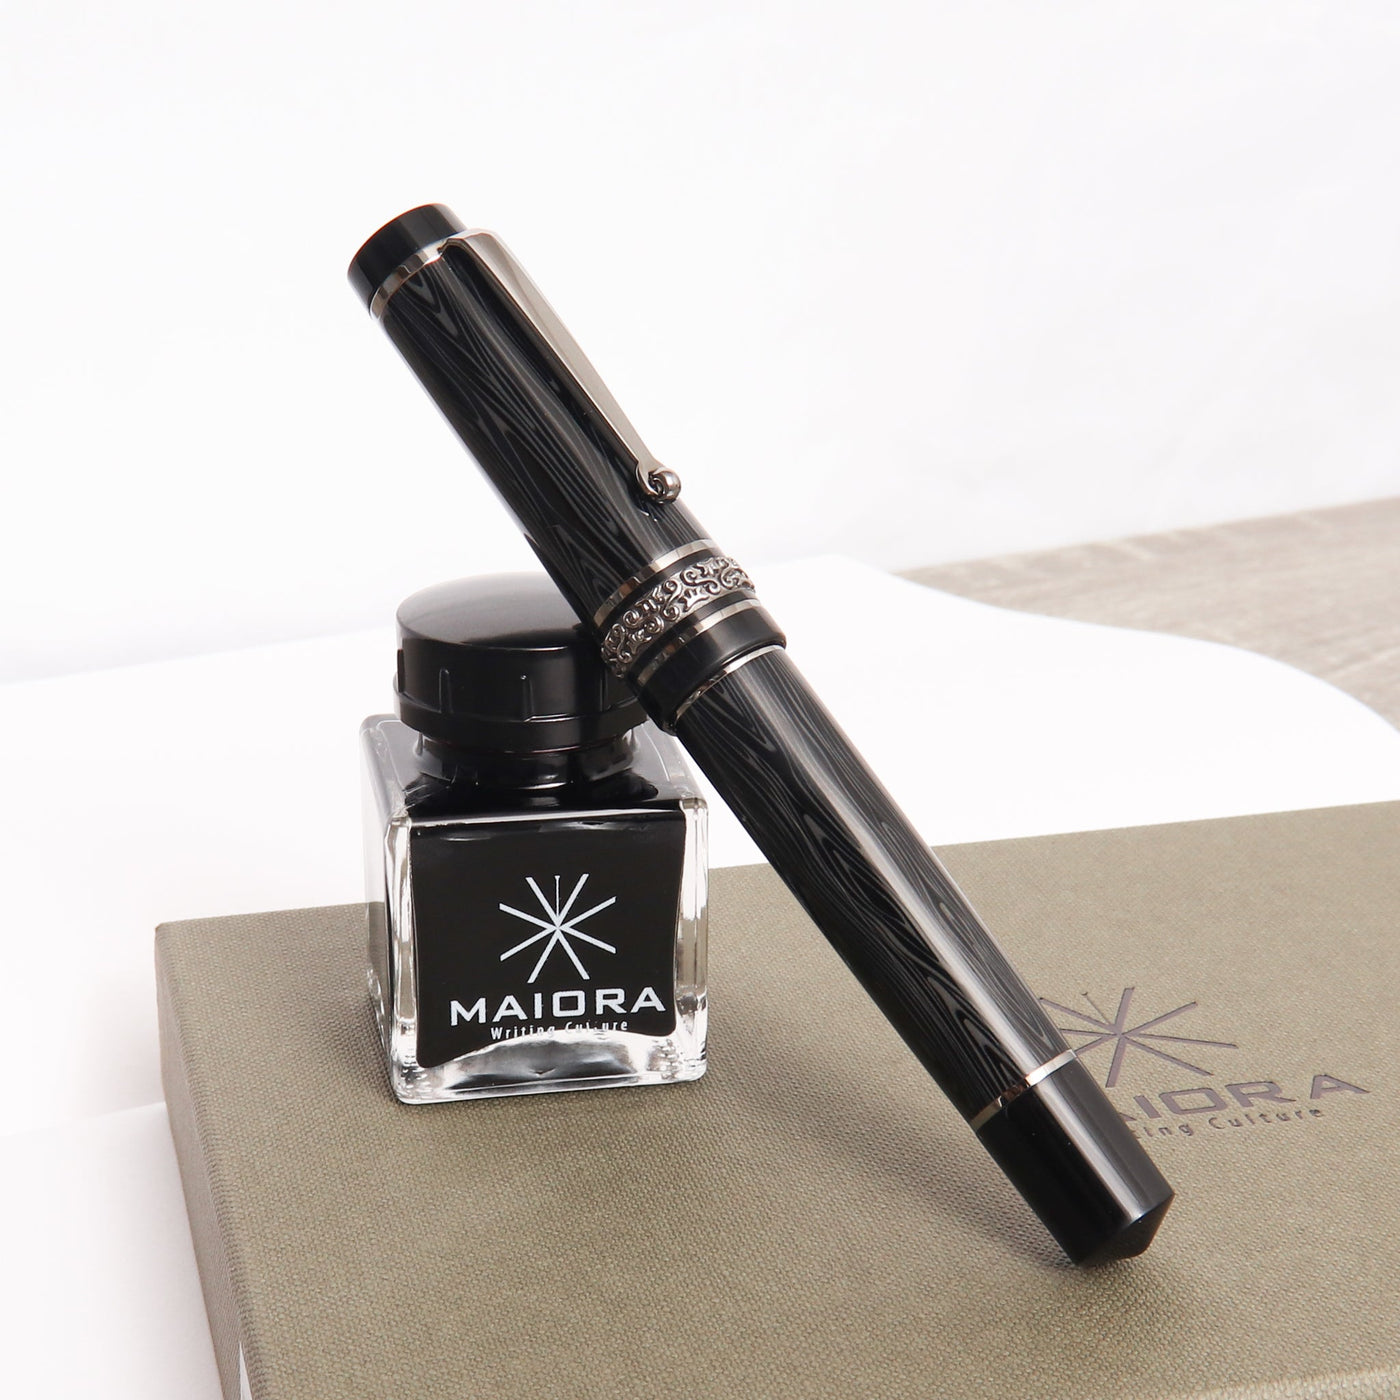 Maiora Foresta Nera Limited Edition 68 Fountain Pen With Bottle of Ink